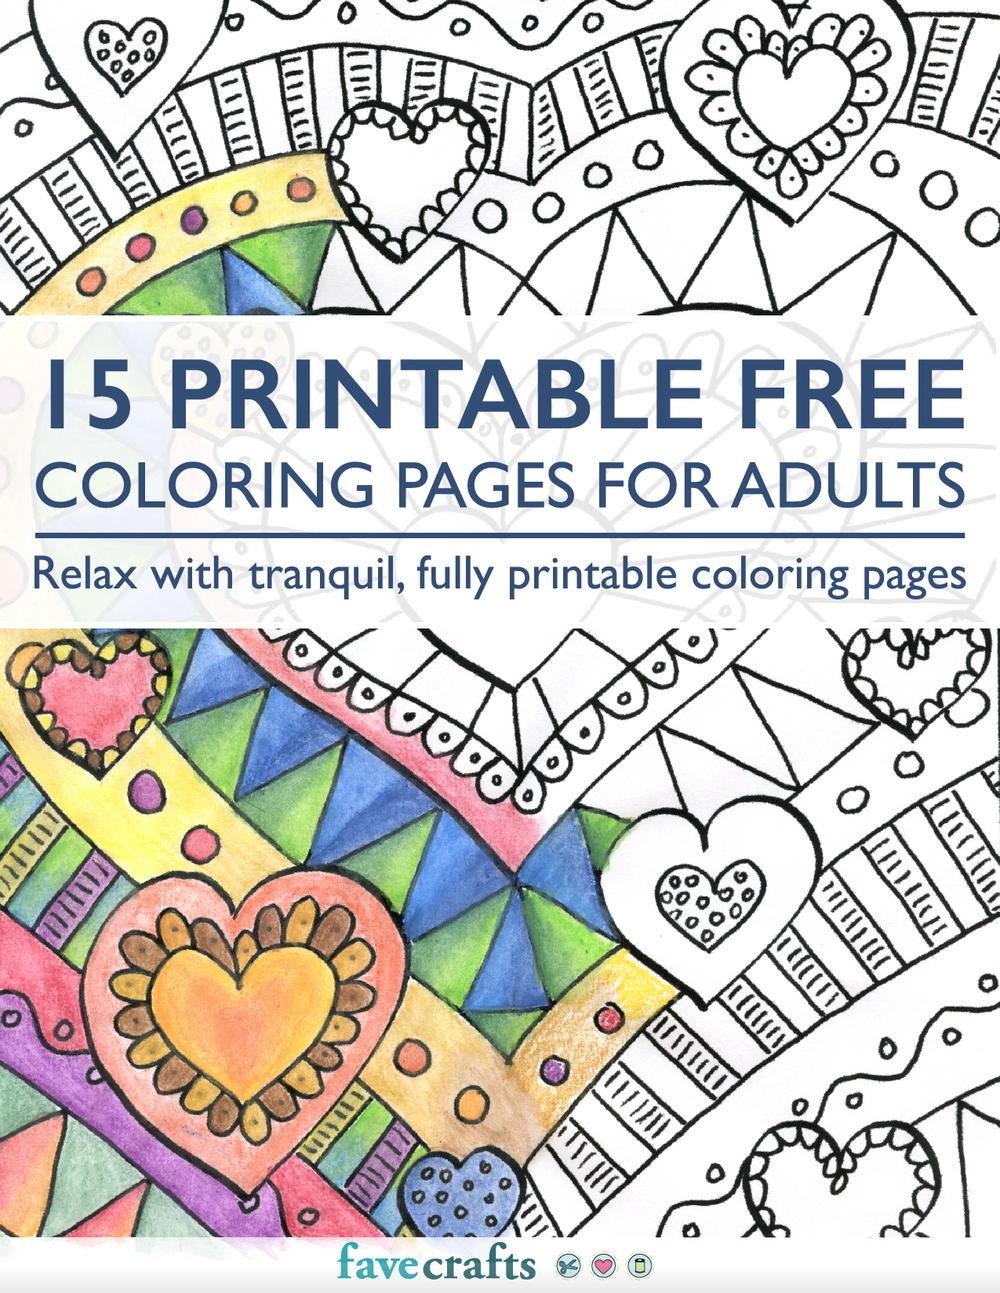 Printable Adult Coloring Book
 15 Printable Free Coloring Pages for Adults [PDF